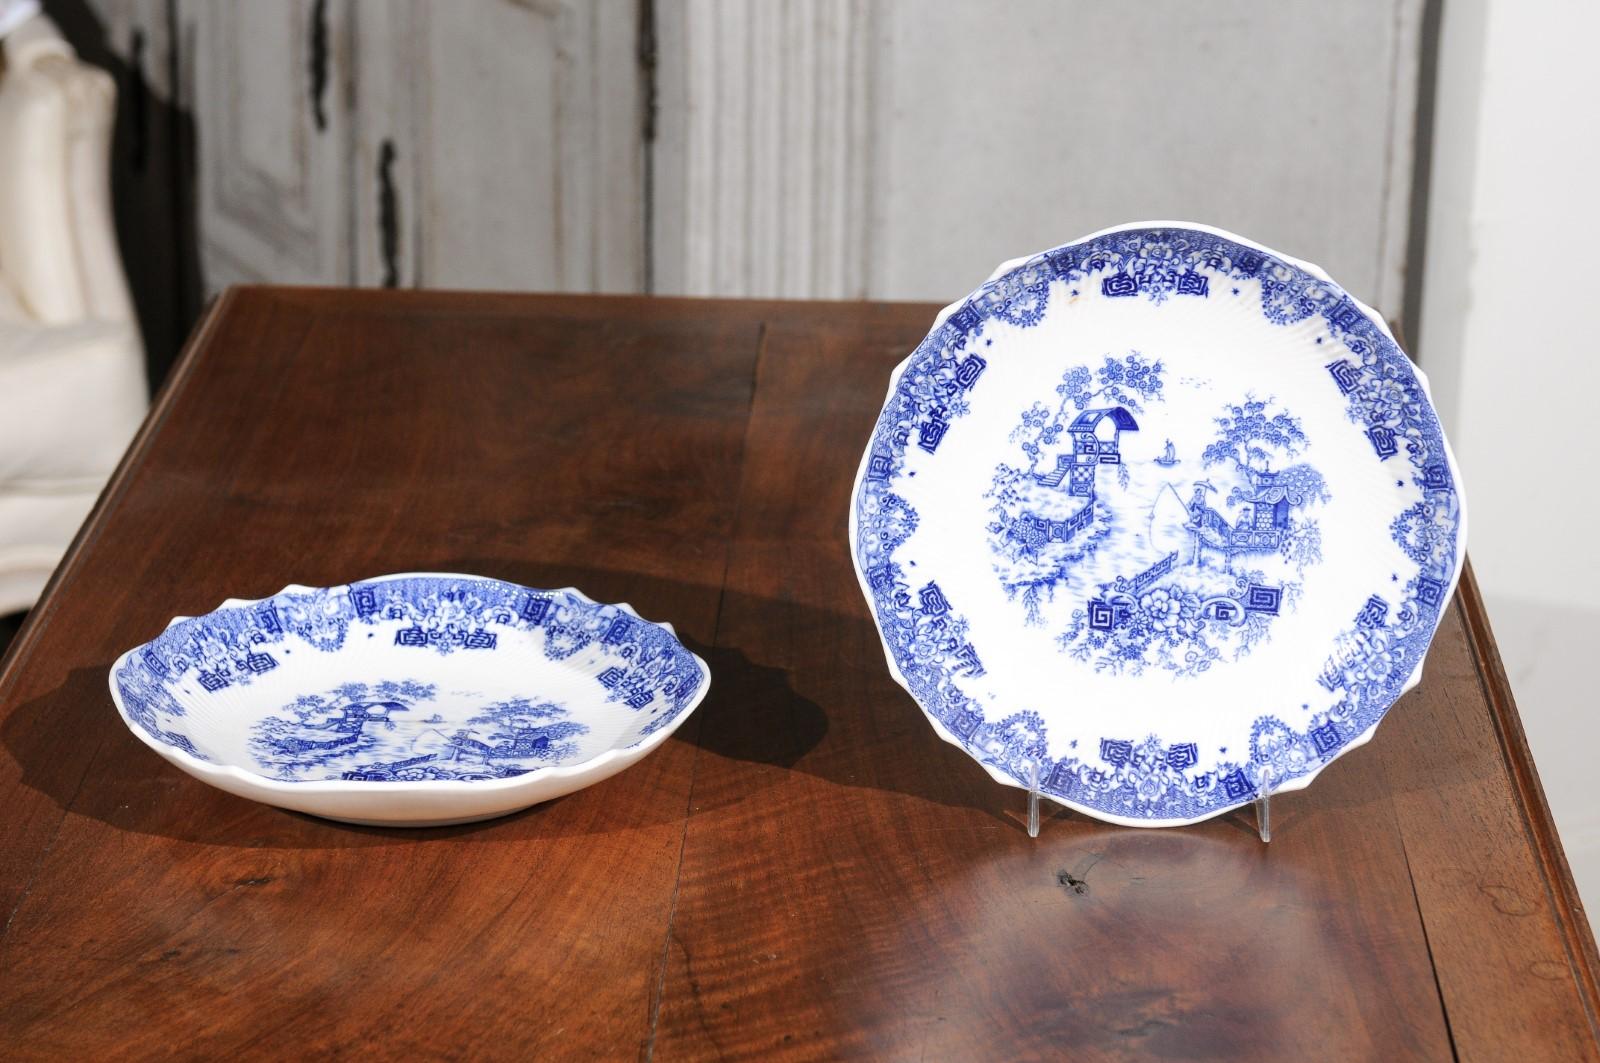 Two English Victorian period blue and white Copeland Spode plates from the late 19th century, with chinoiserie motifs, priced and sold individually. Born in England during the later years of the 19th century, each of these two plates features a